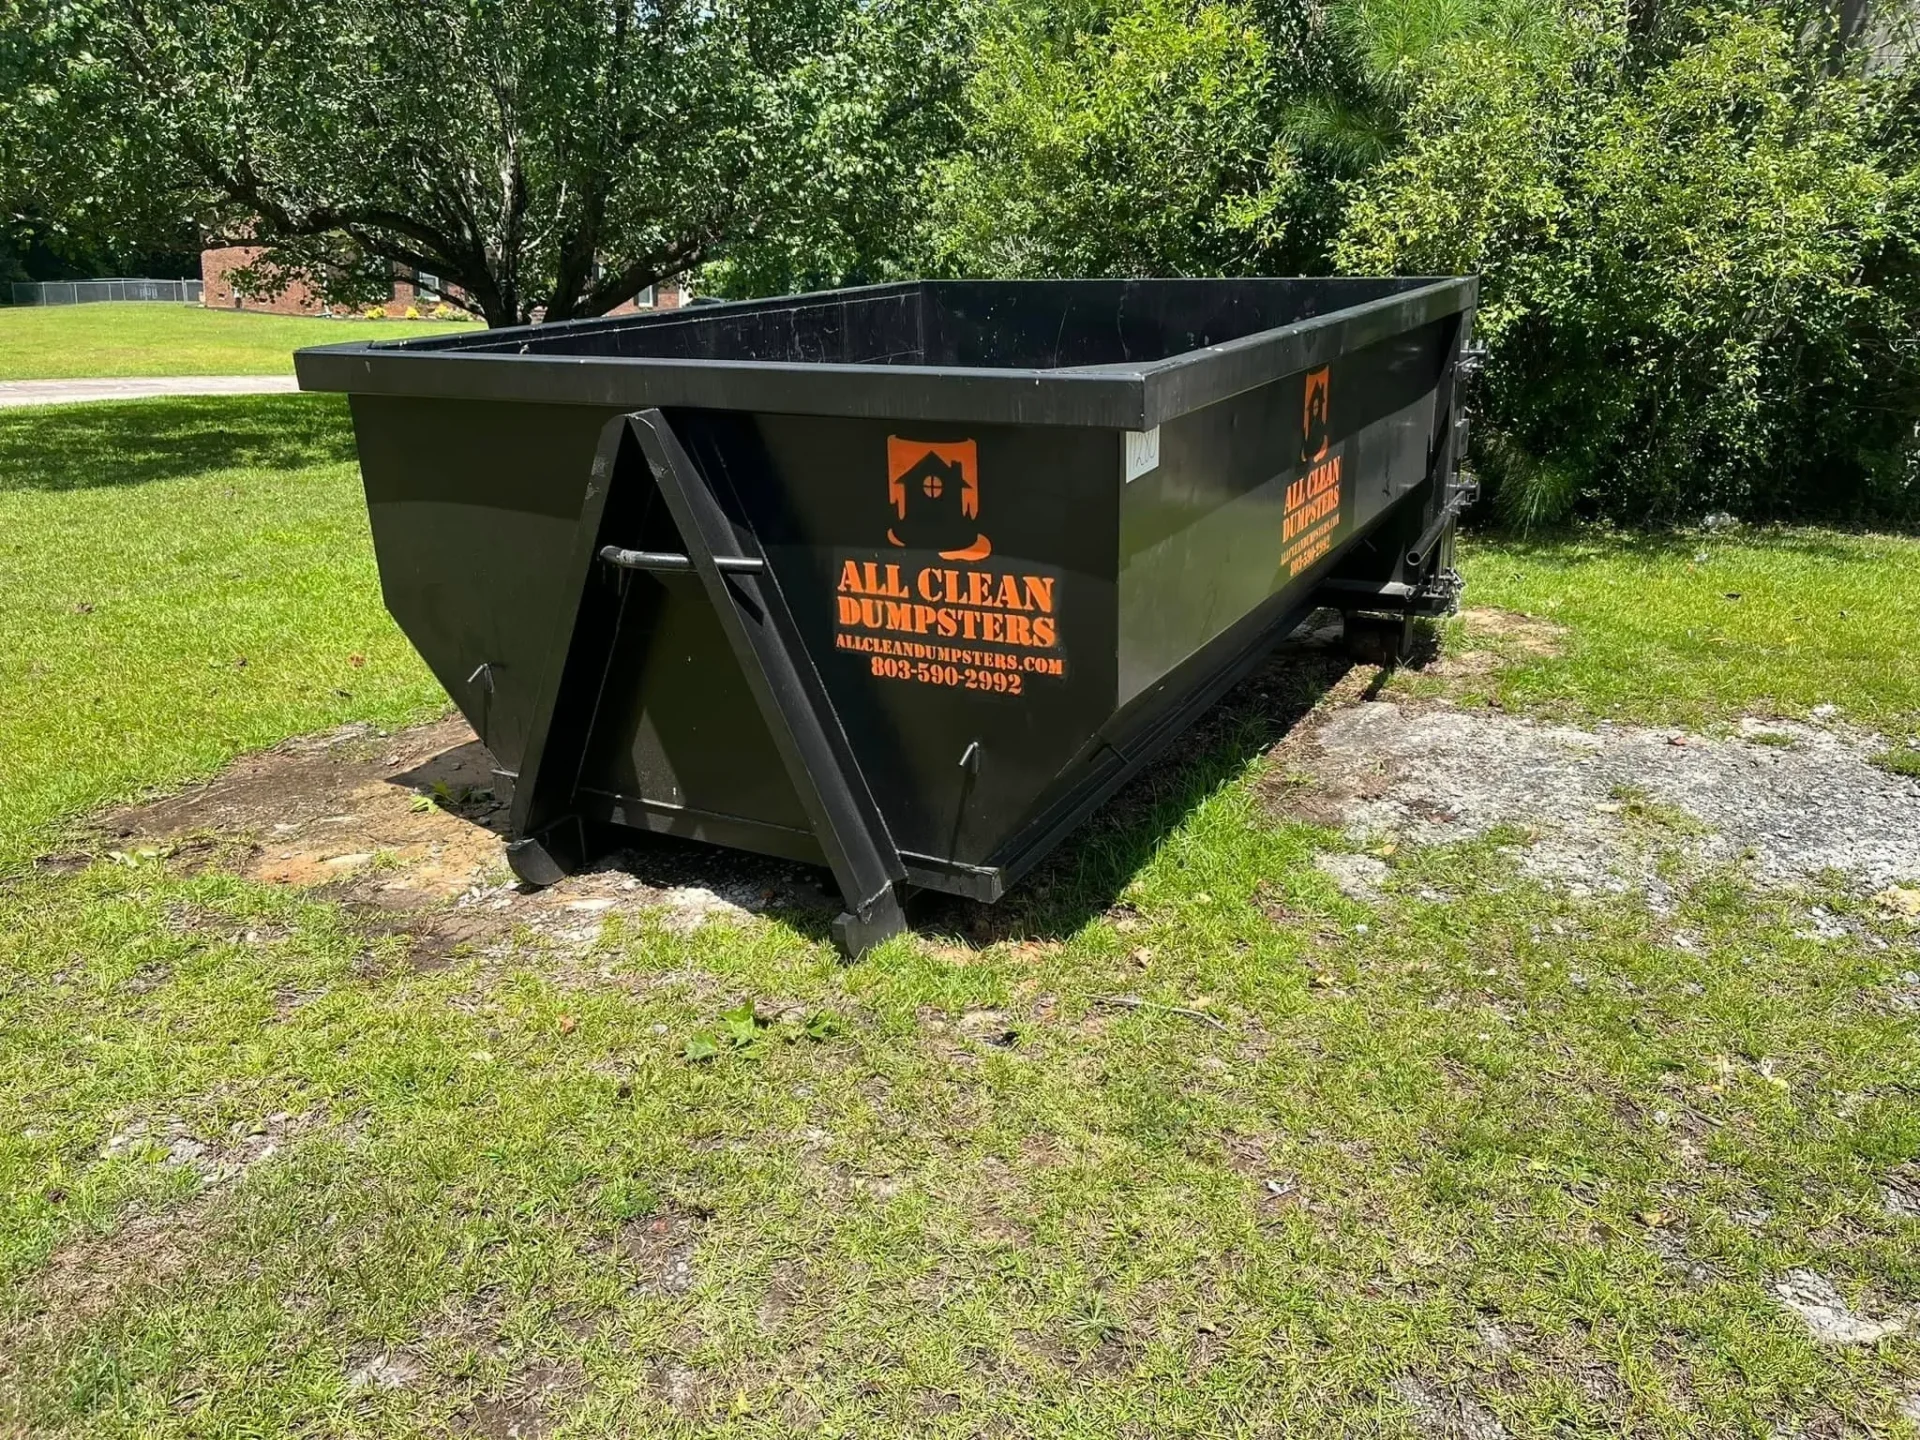 A dumpster sitting in the grass near some trees.